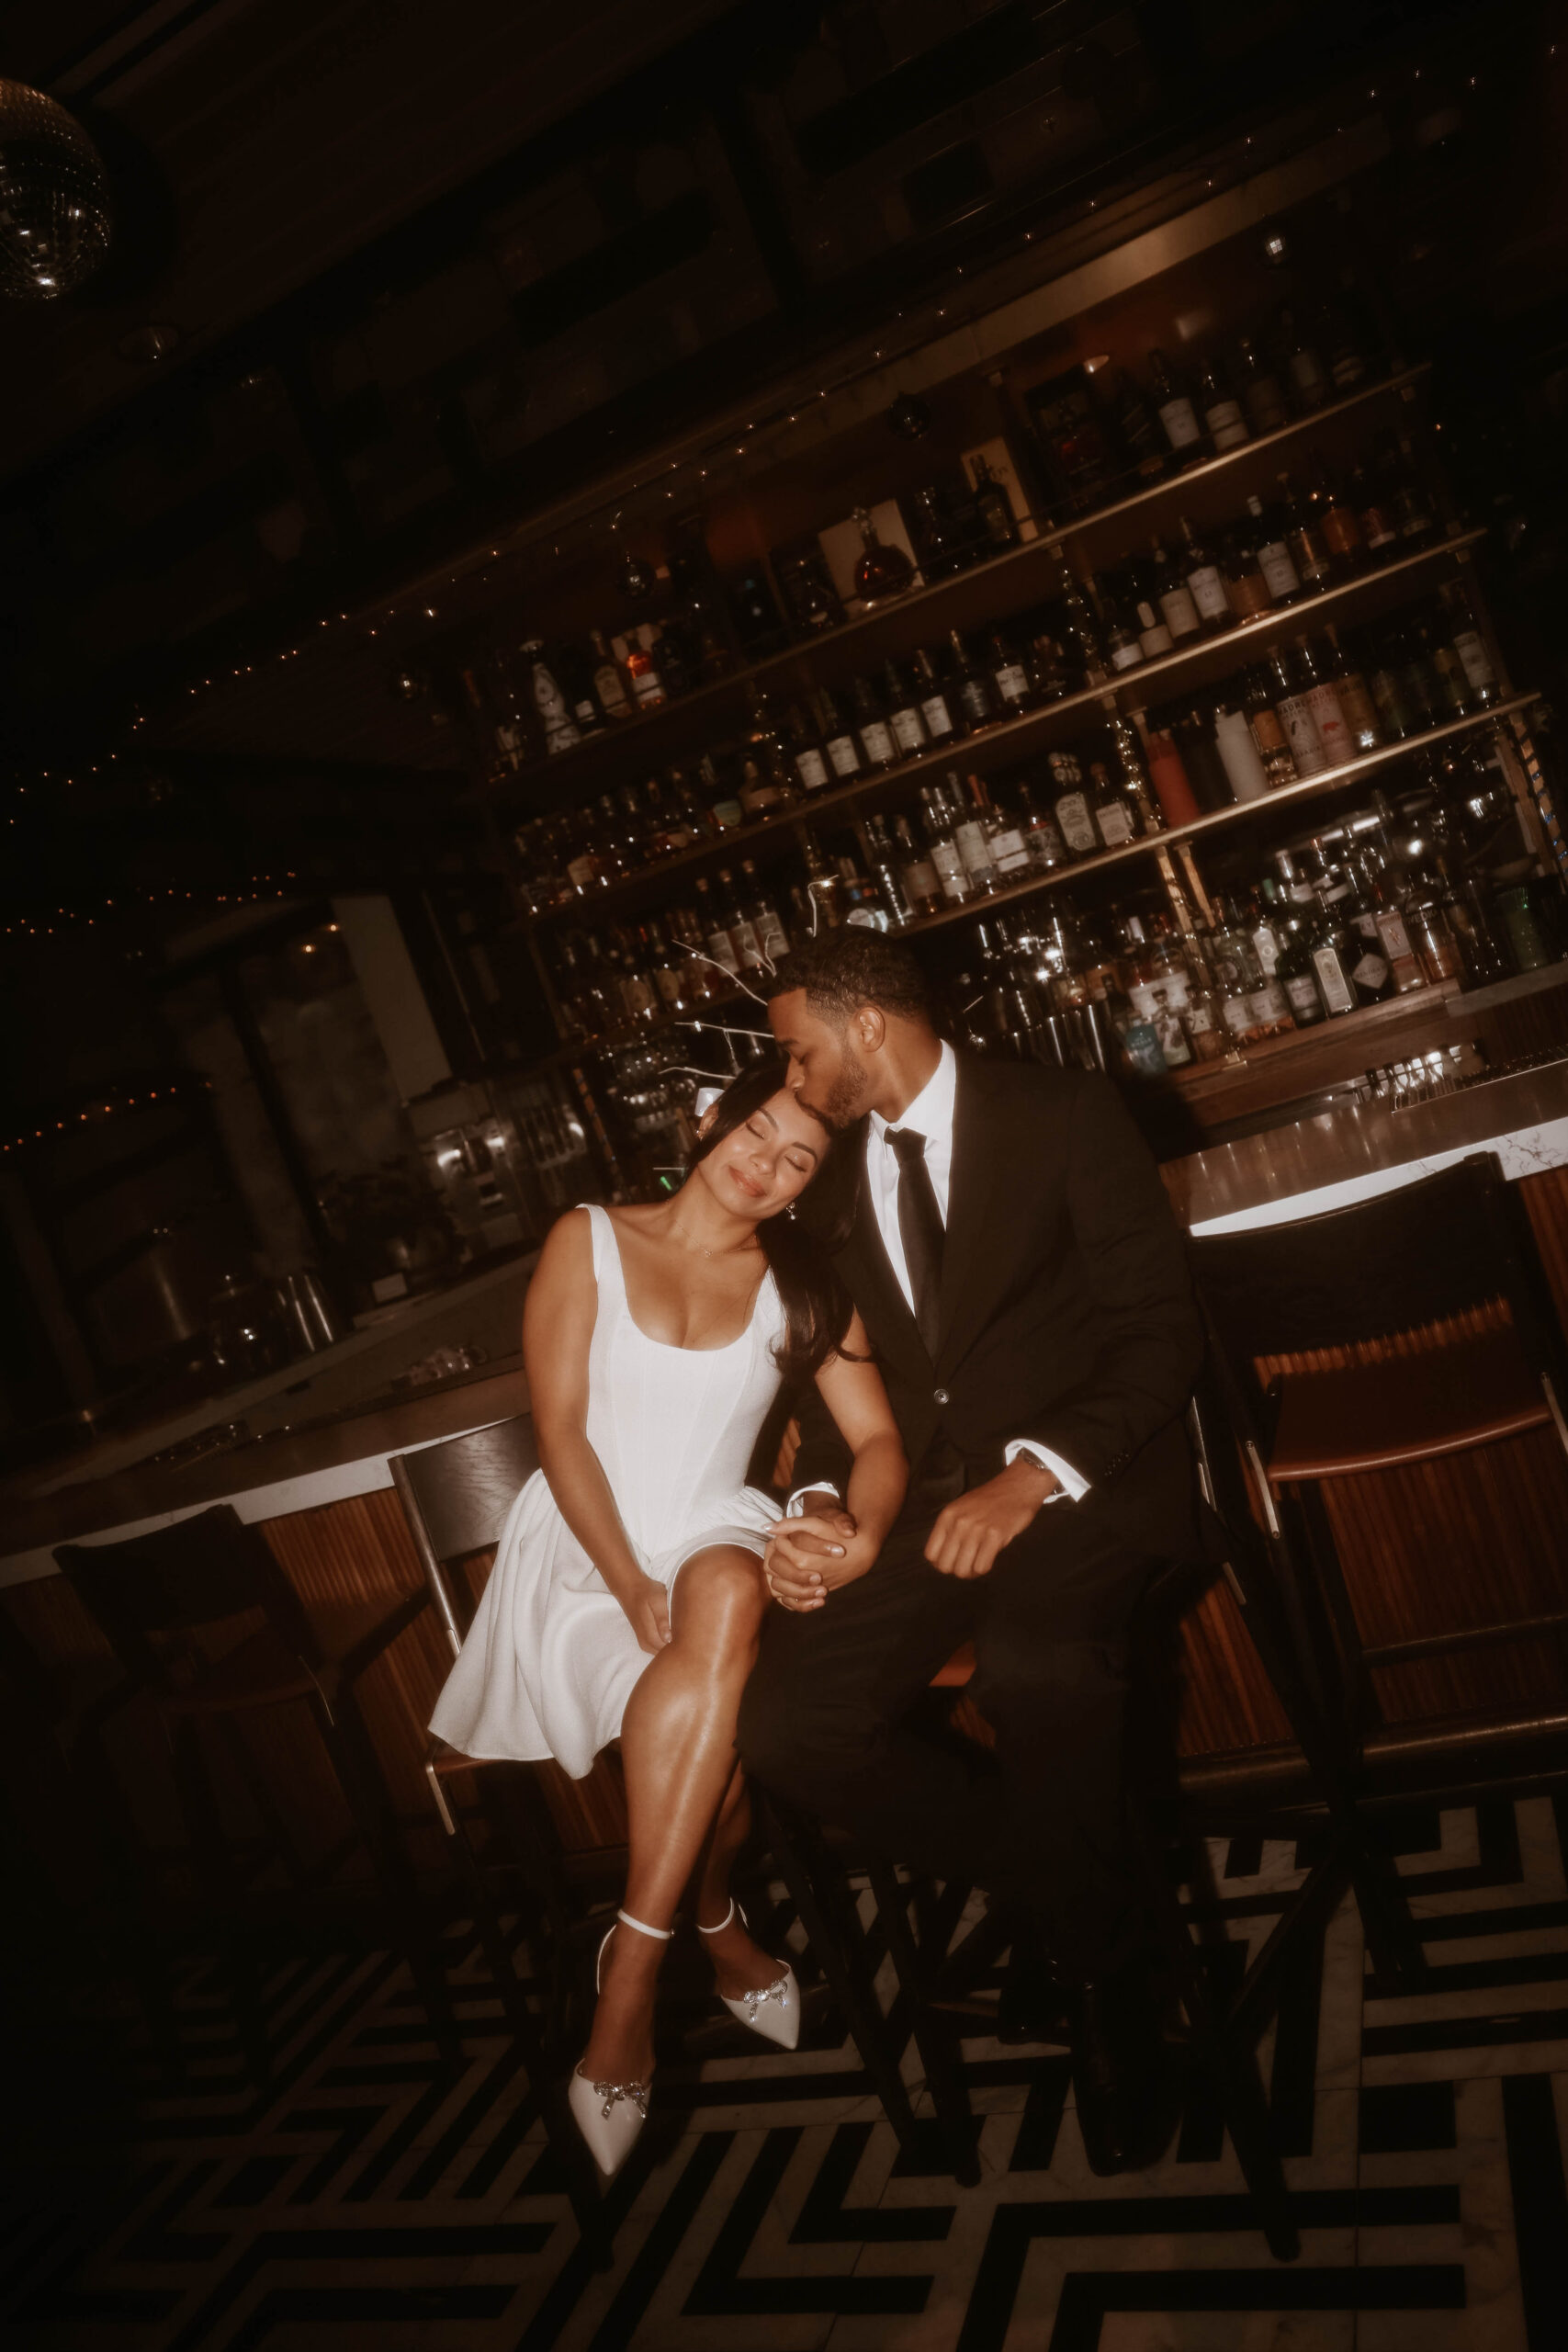 vintage looking photo of couple at the bar expressing their unique engagement shoot ideas